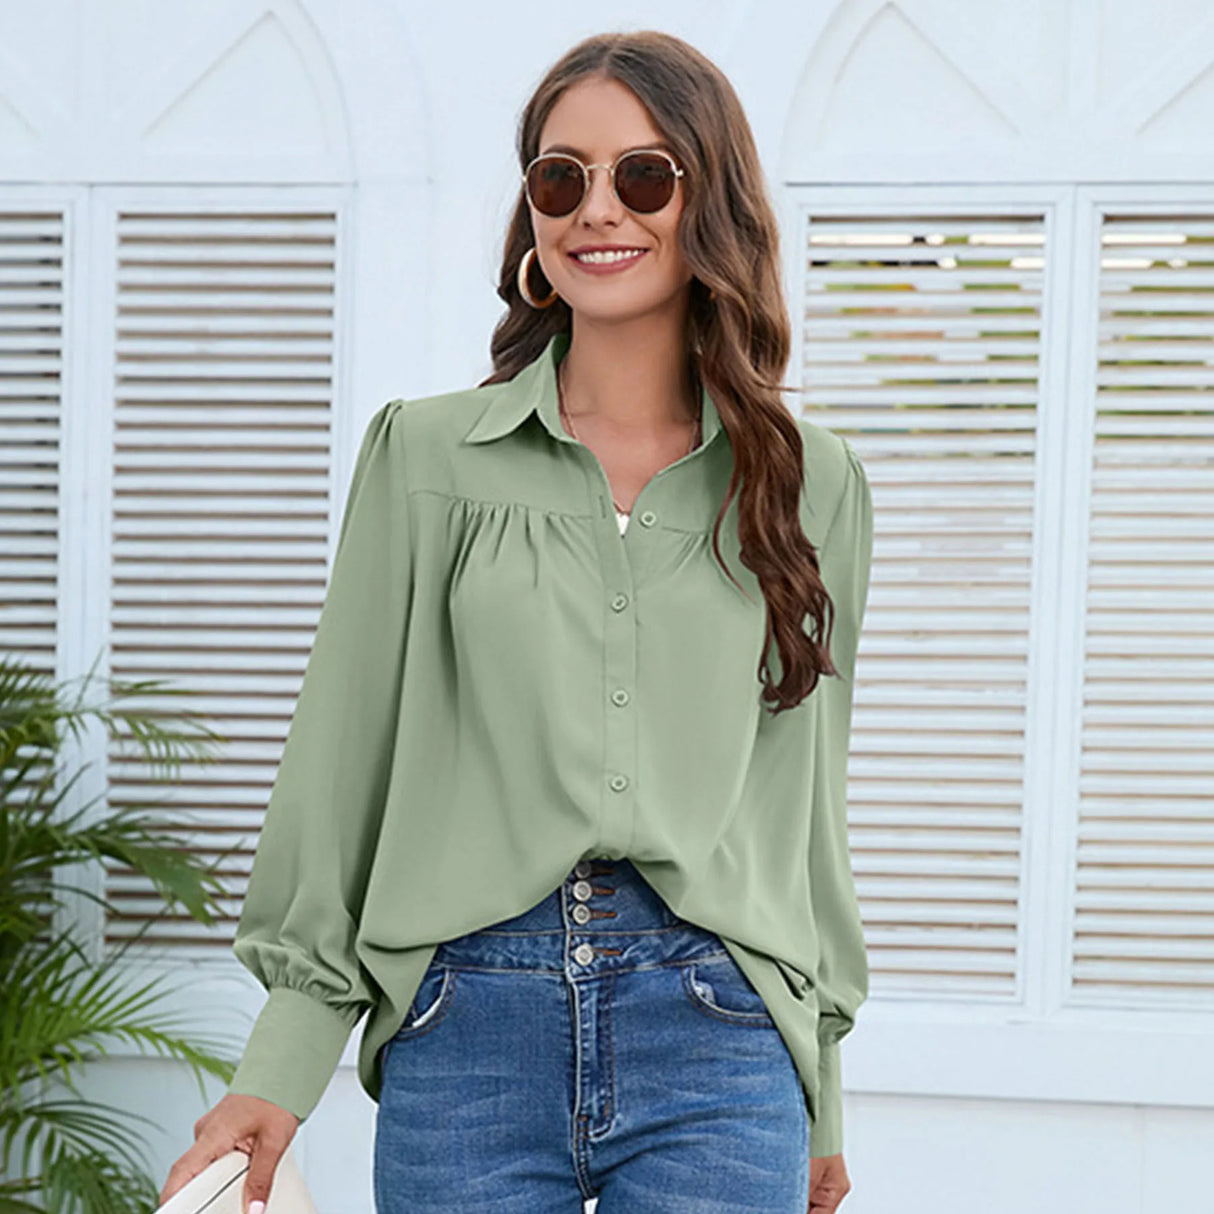 A plain, wide women's shirt with ruffles at the chest area, long puff sleeves and buttons on the front